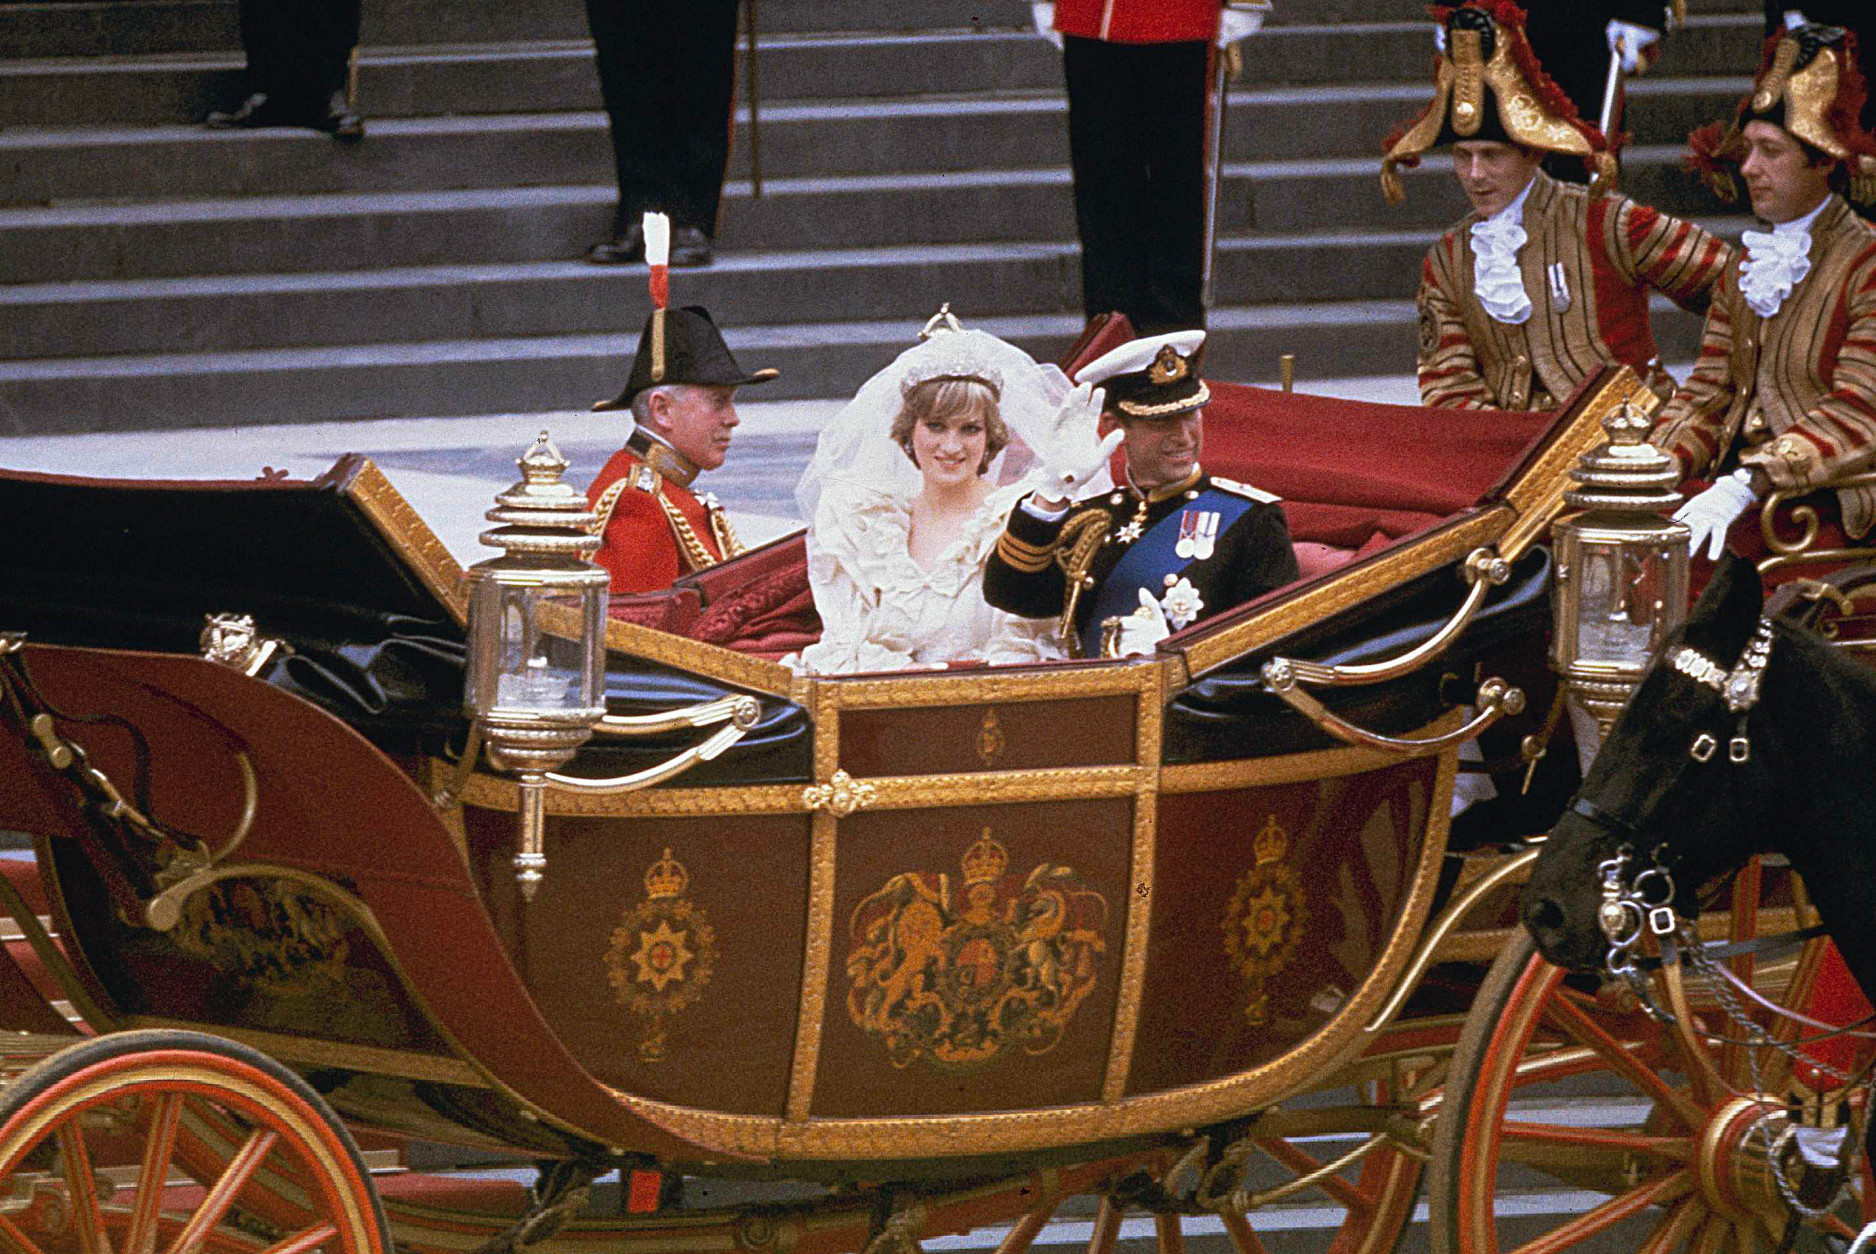 The carriage carrying the Prince and Princess of Wales passes along Trafalgar Square on its way from St. Paul's Cathedral to Buckingham Palace after the royal wedding in London on July 29, 1981.  (AP Photo)